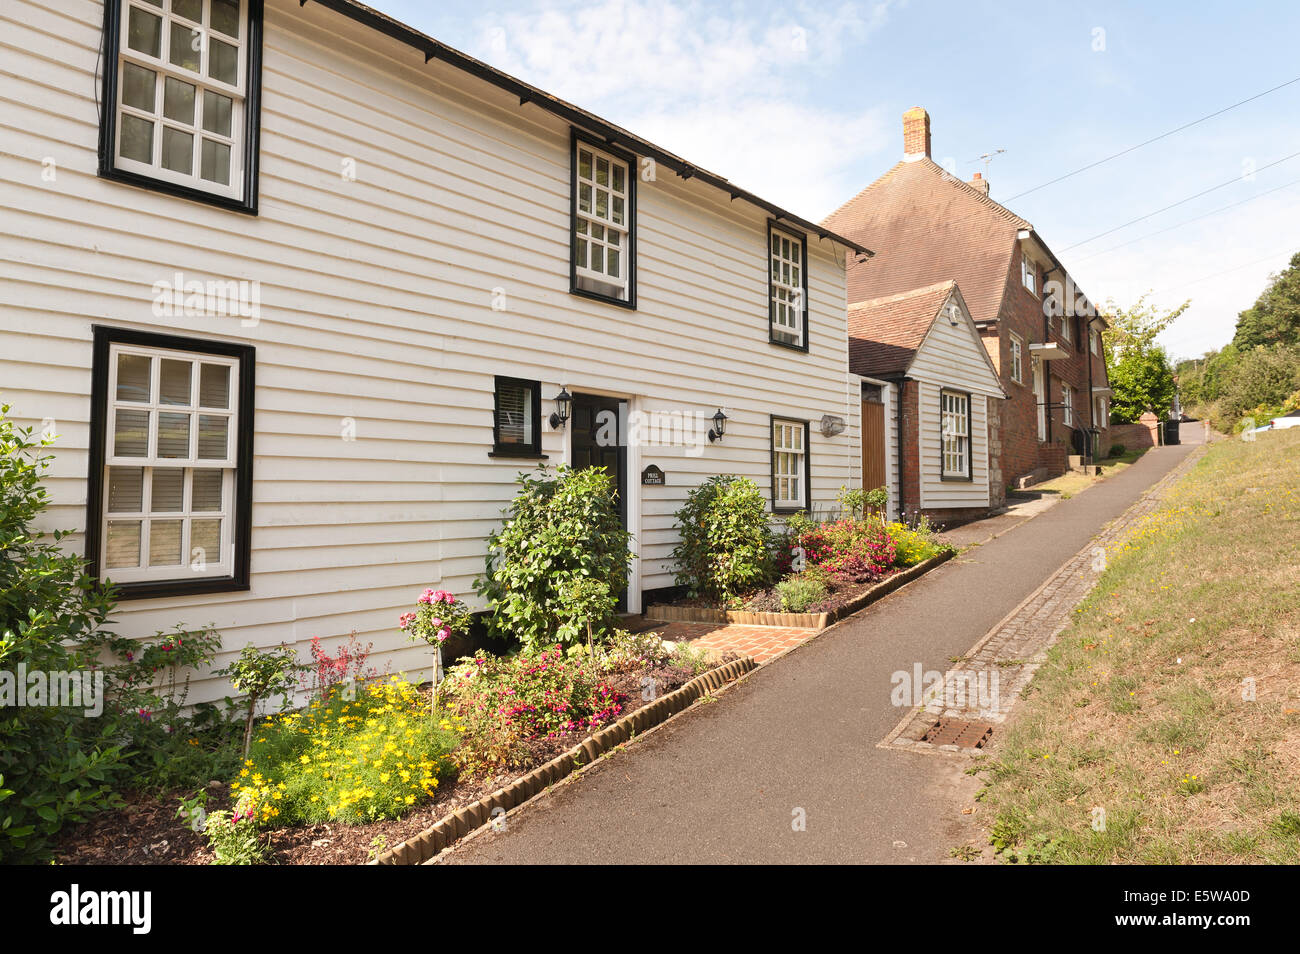 Quaint village streets in Sutton Valence on a typical English summers day showing wooden and handmade hanging tile cladding Stock Photo